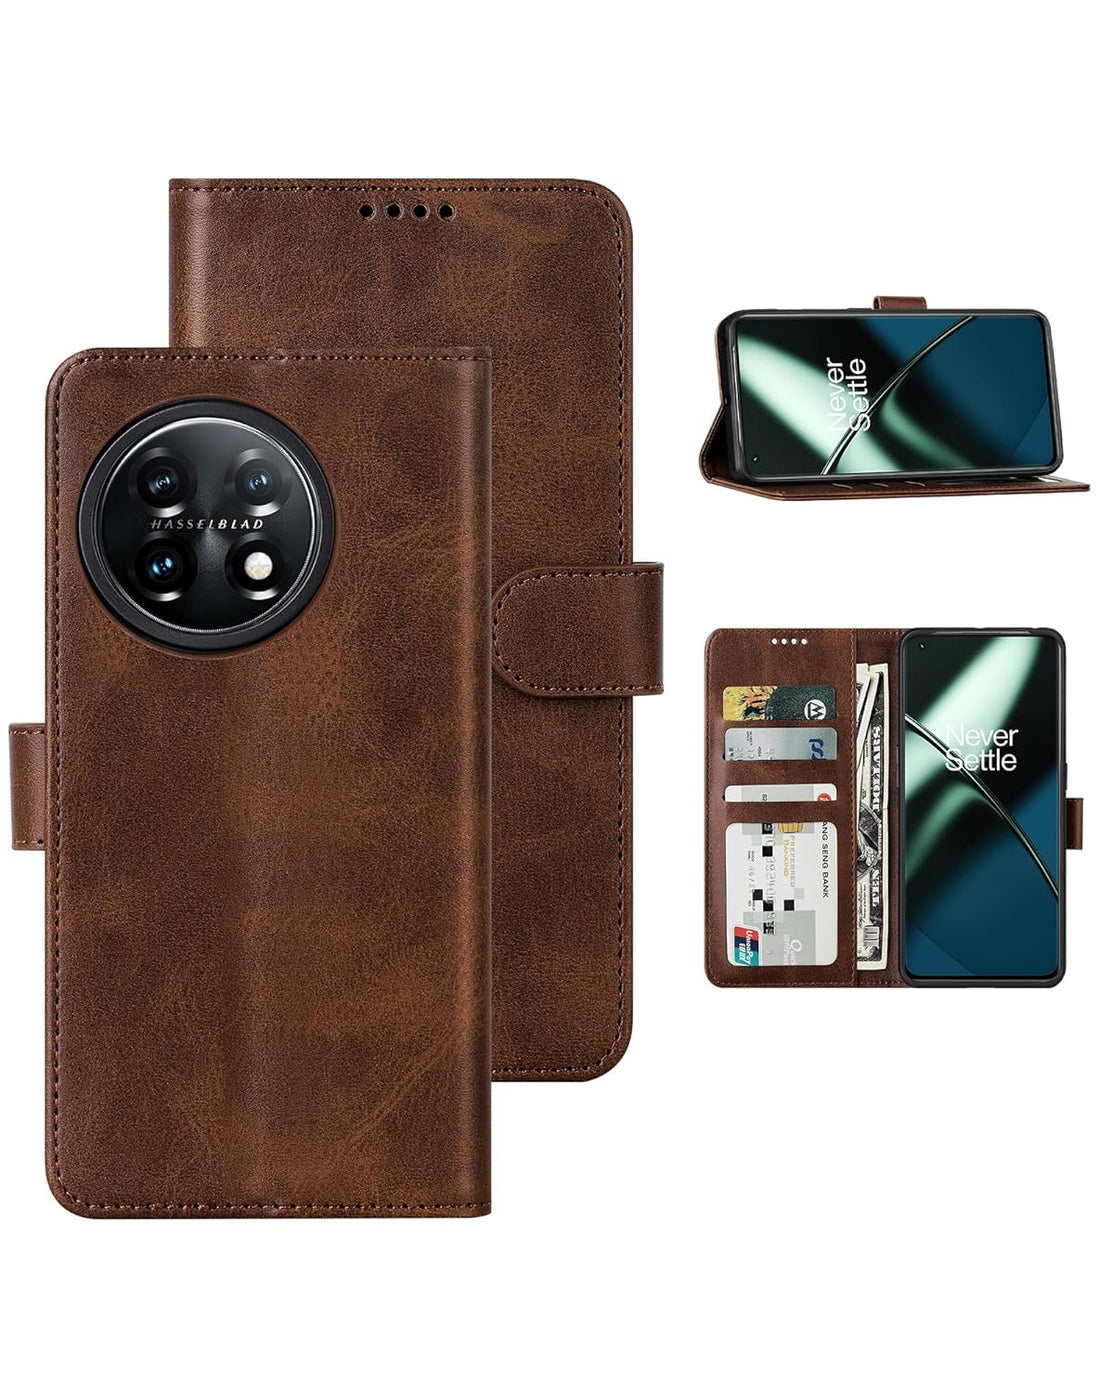 Feitenn for Oneplus 11 5G Wallet Case, Flip PU Leather Case with Kickstand Card Slots Shockproof case Cover for Oneplus 11 5G 2023 (Brown)